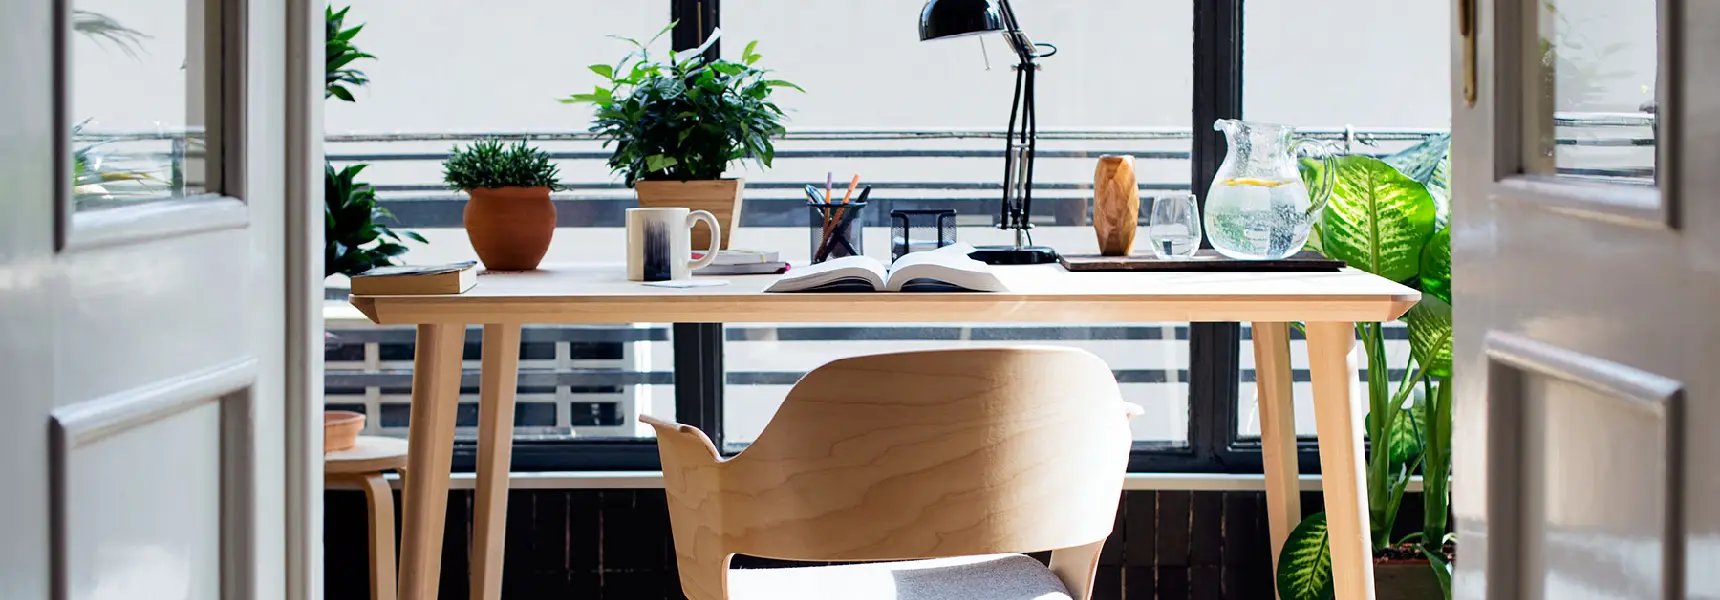 5 Ideas for Office and Home - An Aesthetic and Modern Look